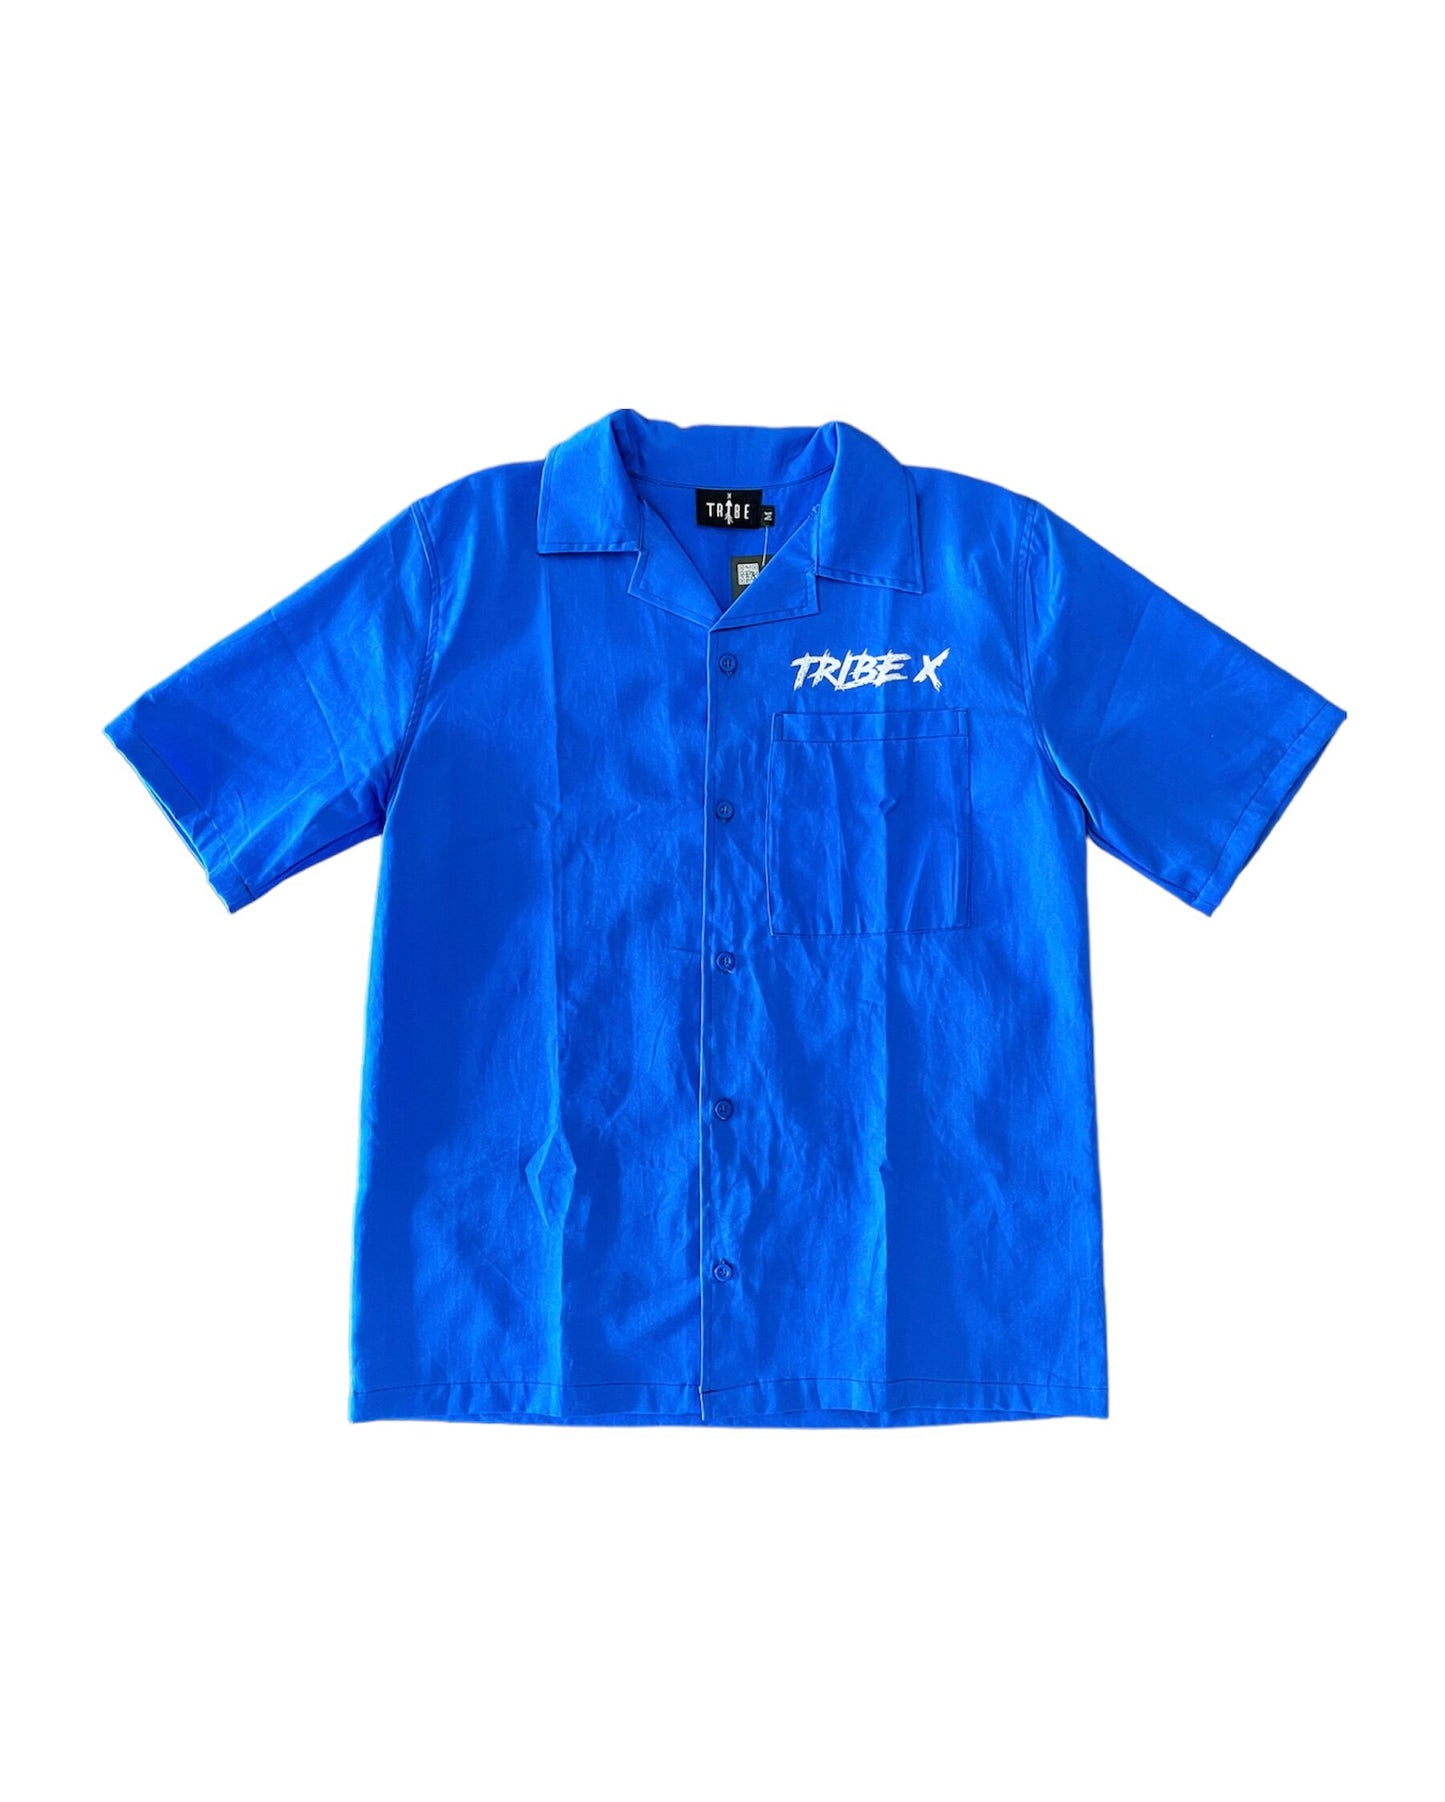 “I Wish Heaven” Button Up - Blue